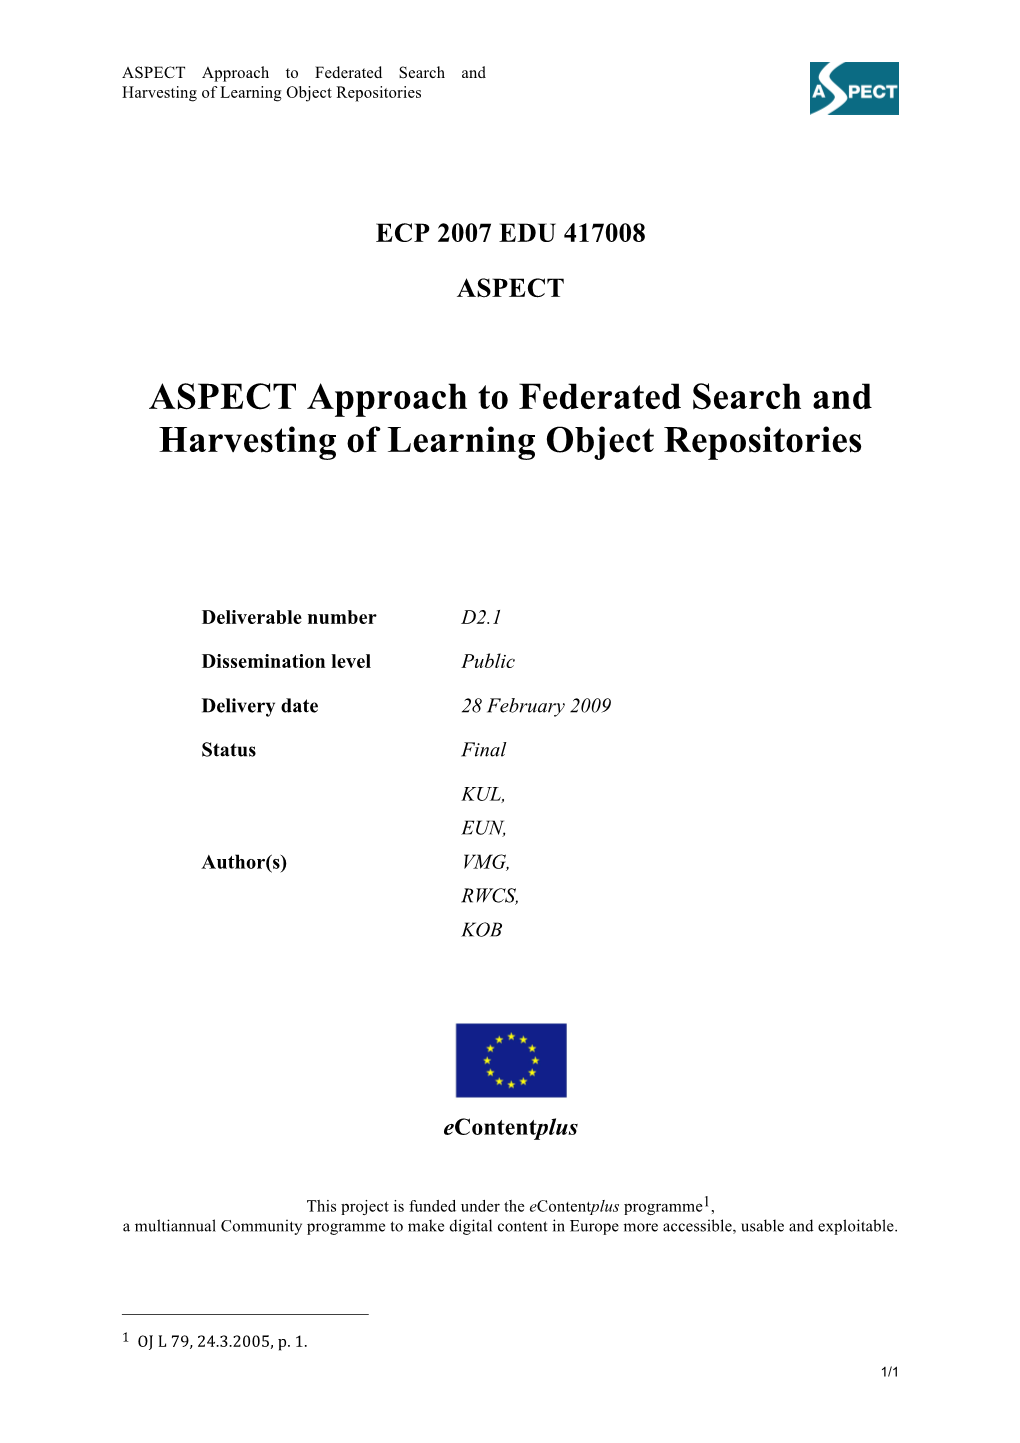 ASPECT Approach to Federated Search and Harvesting of Learning Object Repositories